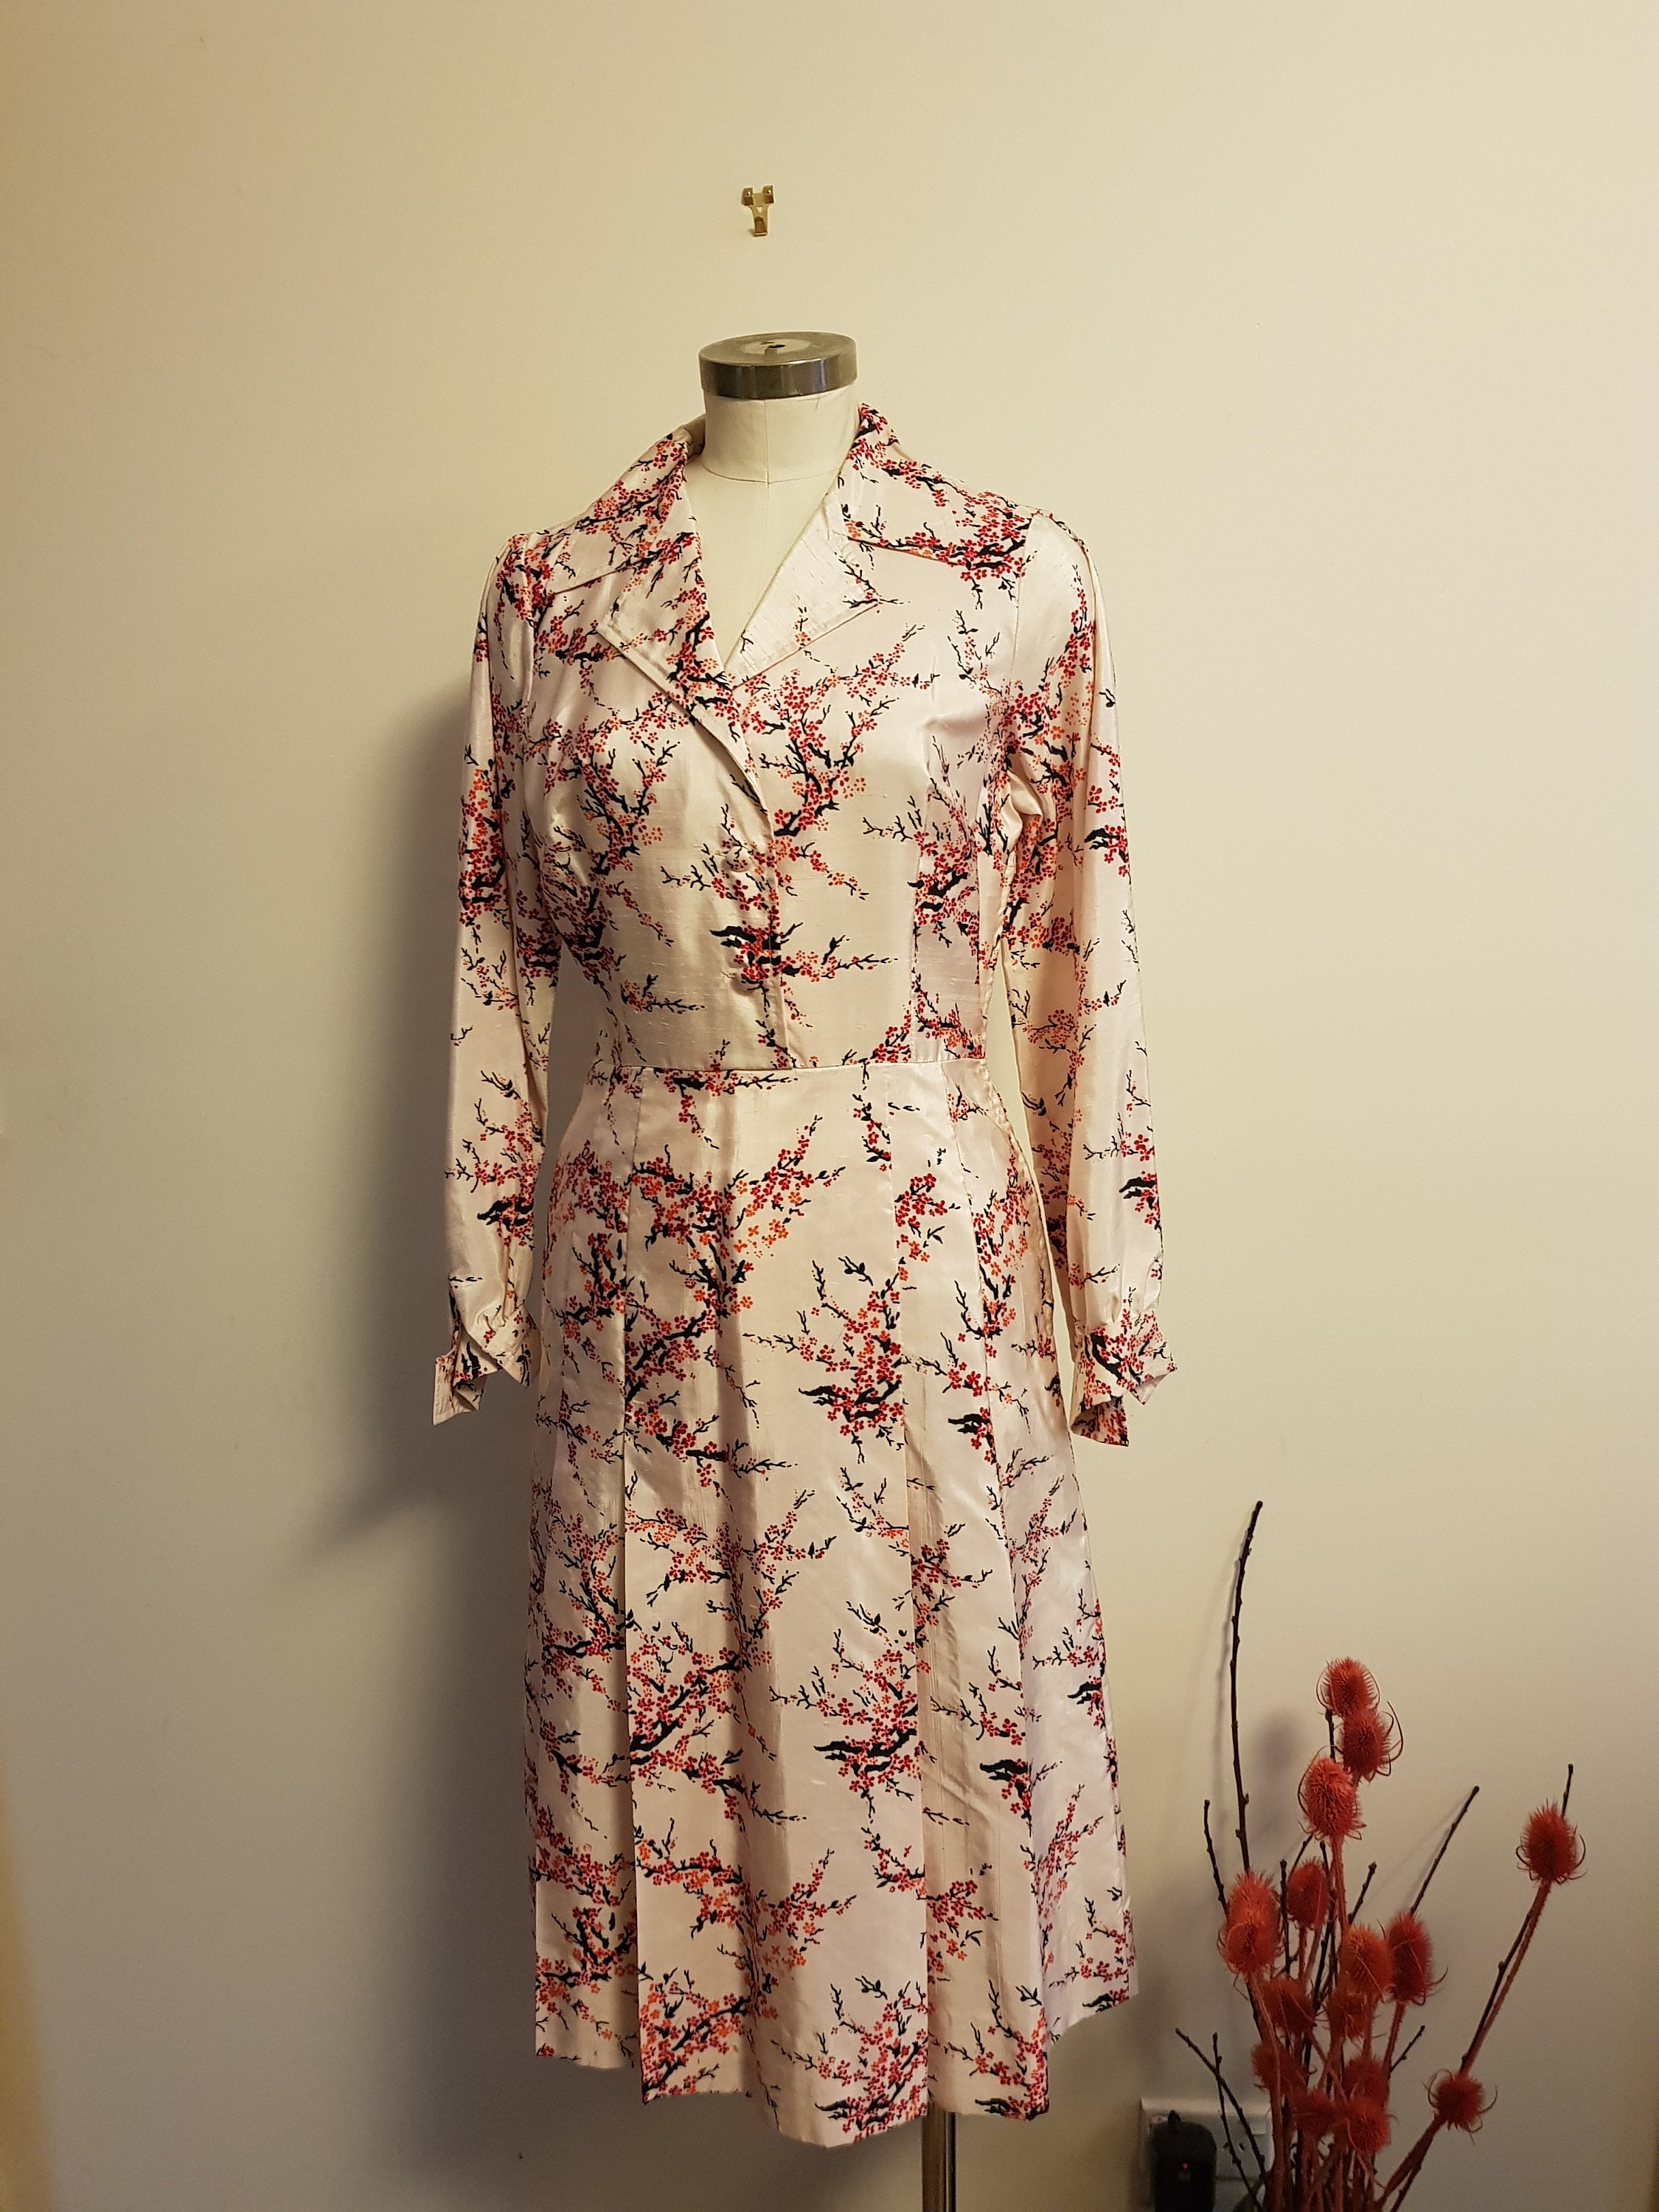 Lovely Raw Silk 1960s Dress With Cherry Blossom Print. Shirt Style